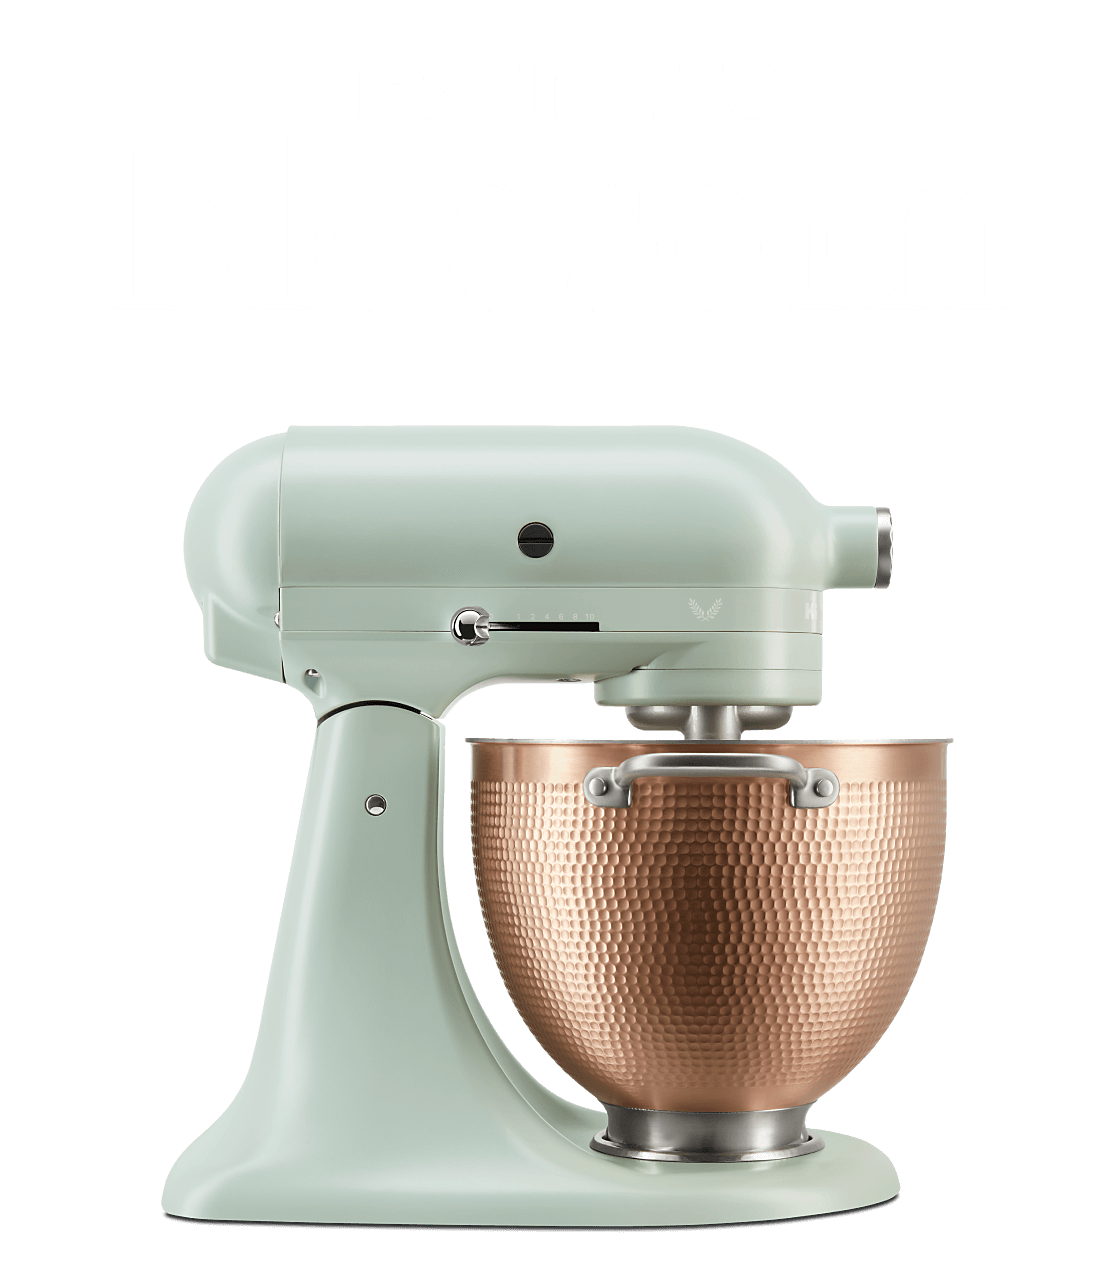 The KitchenAid® Design Series Stand Mixer on a thyme green background with hand-drawn florals and botanicals. 